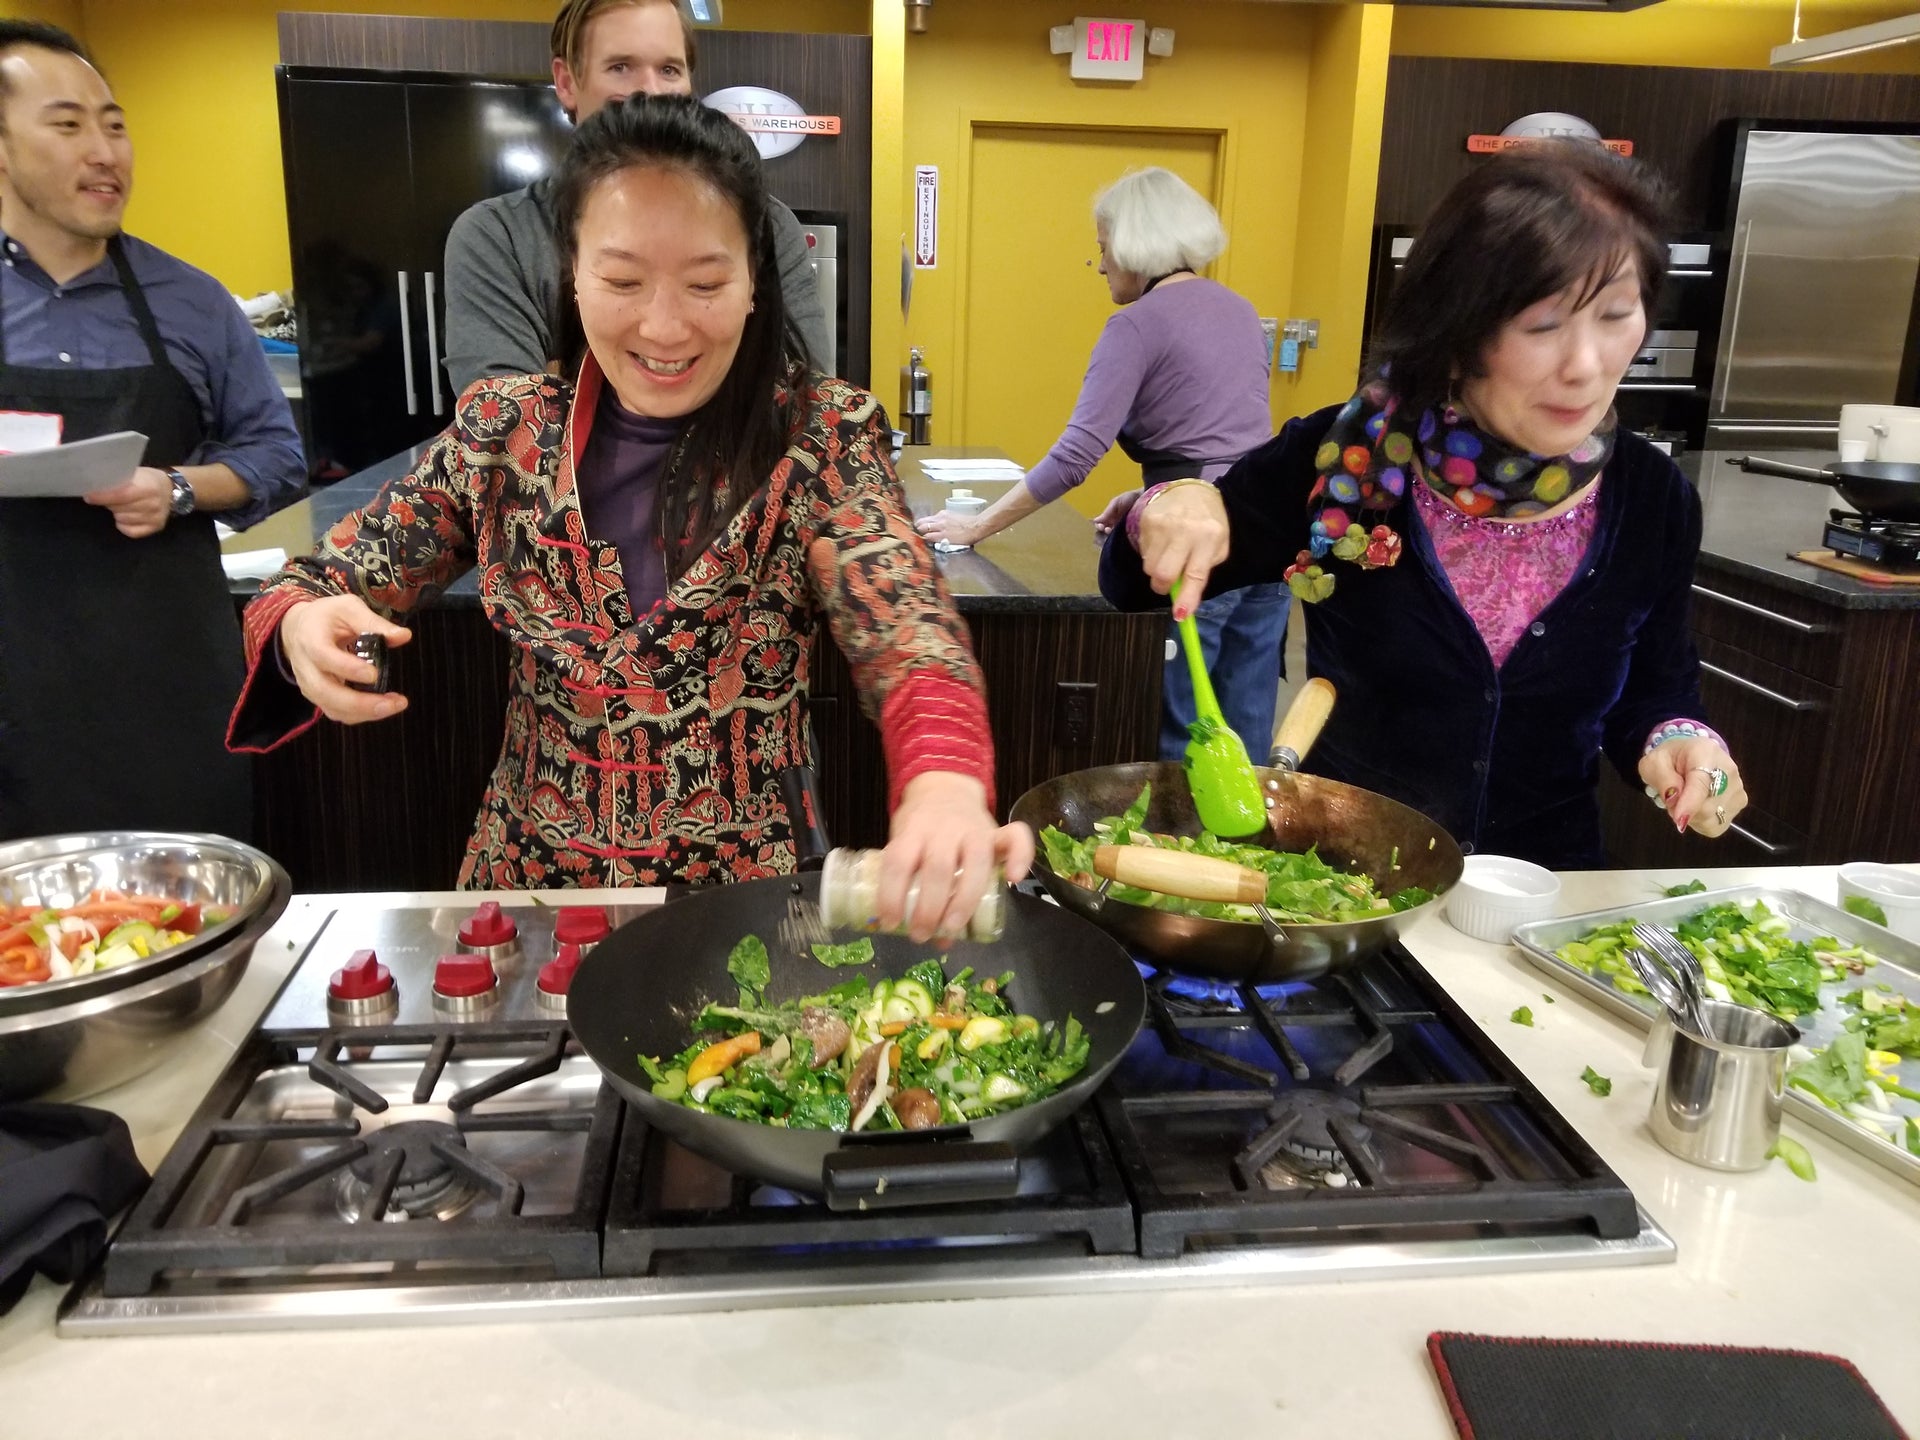 Cooking Classes on Asian Vegetarian, Plant-Based Foods and Fun, Hands-On Chinese Dumplings!